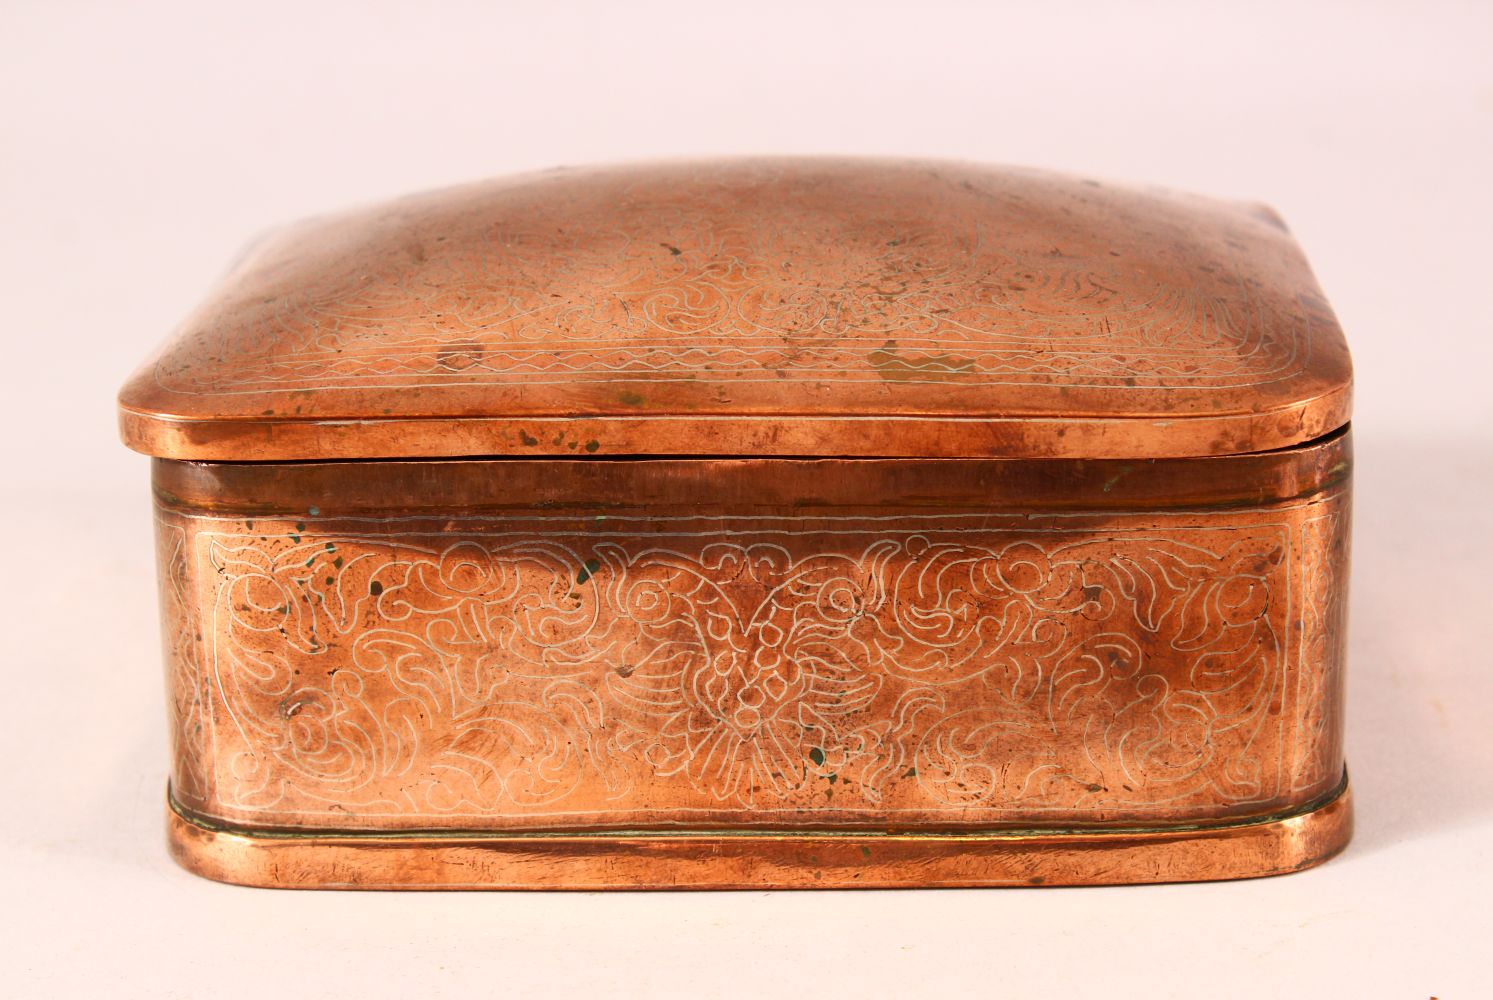 A FINE 19TH CENTURY SRI LANKAN OR BURMESE SILVER INLAID COPPER BOX - decorated with silver inlay